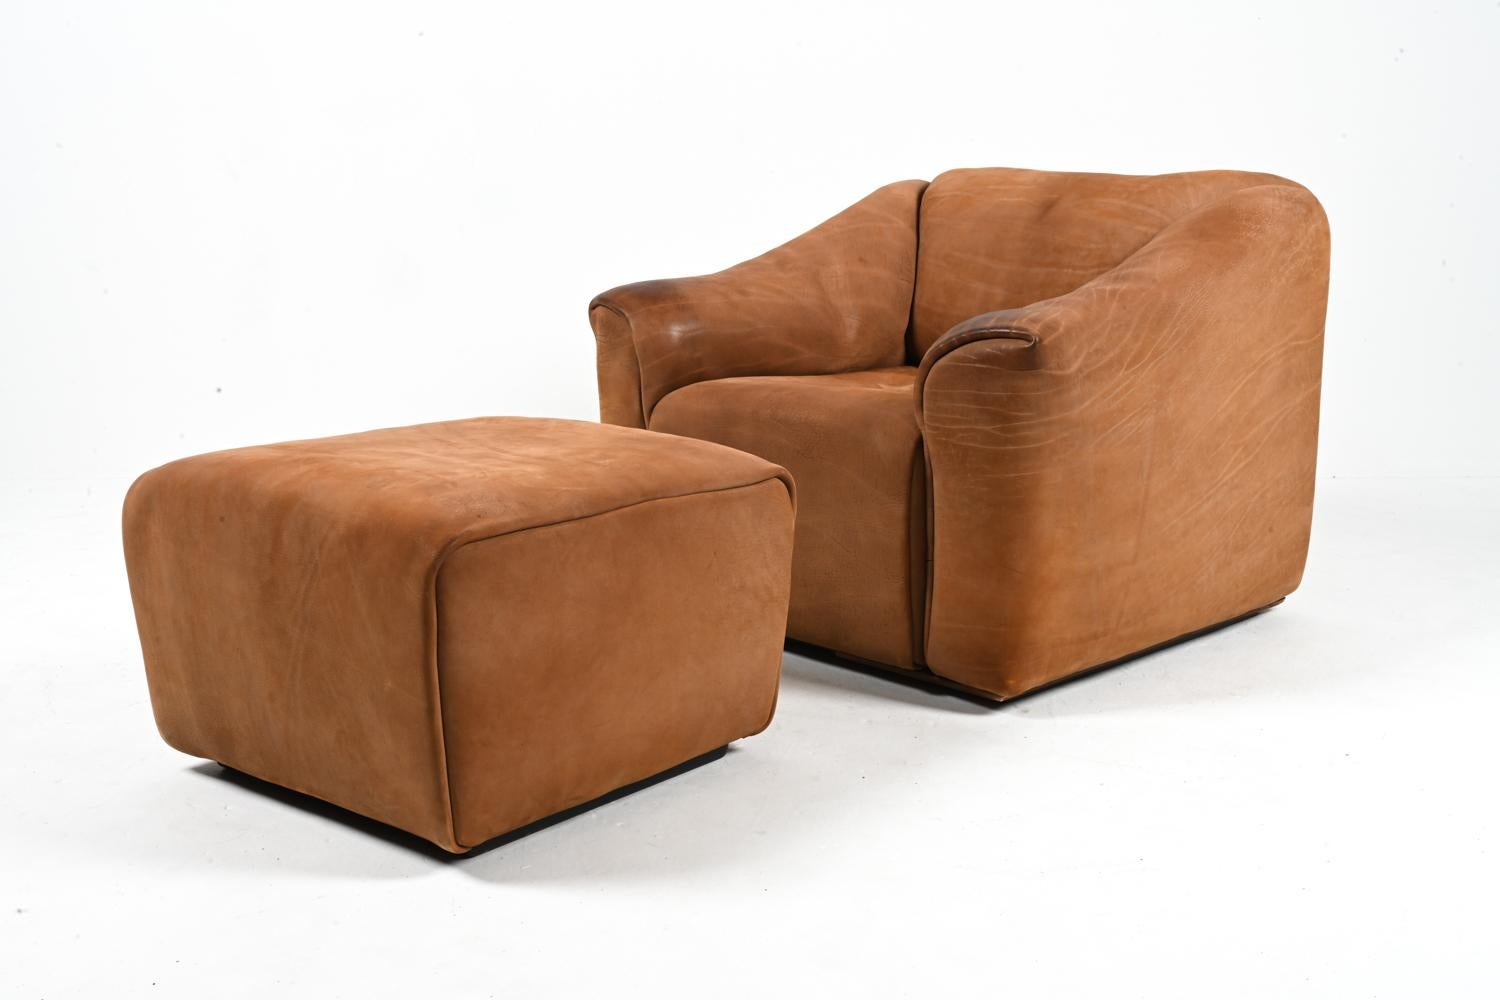 Swiss De Sede DS-47 Lounge Chair & Ottoman in Nubuck Leather, c. 1970's For Sale